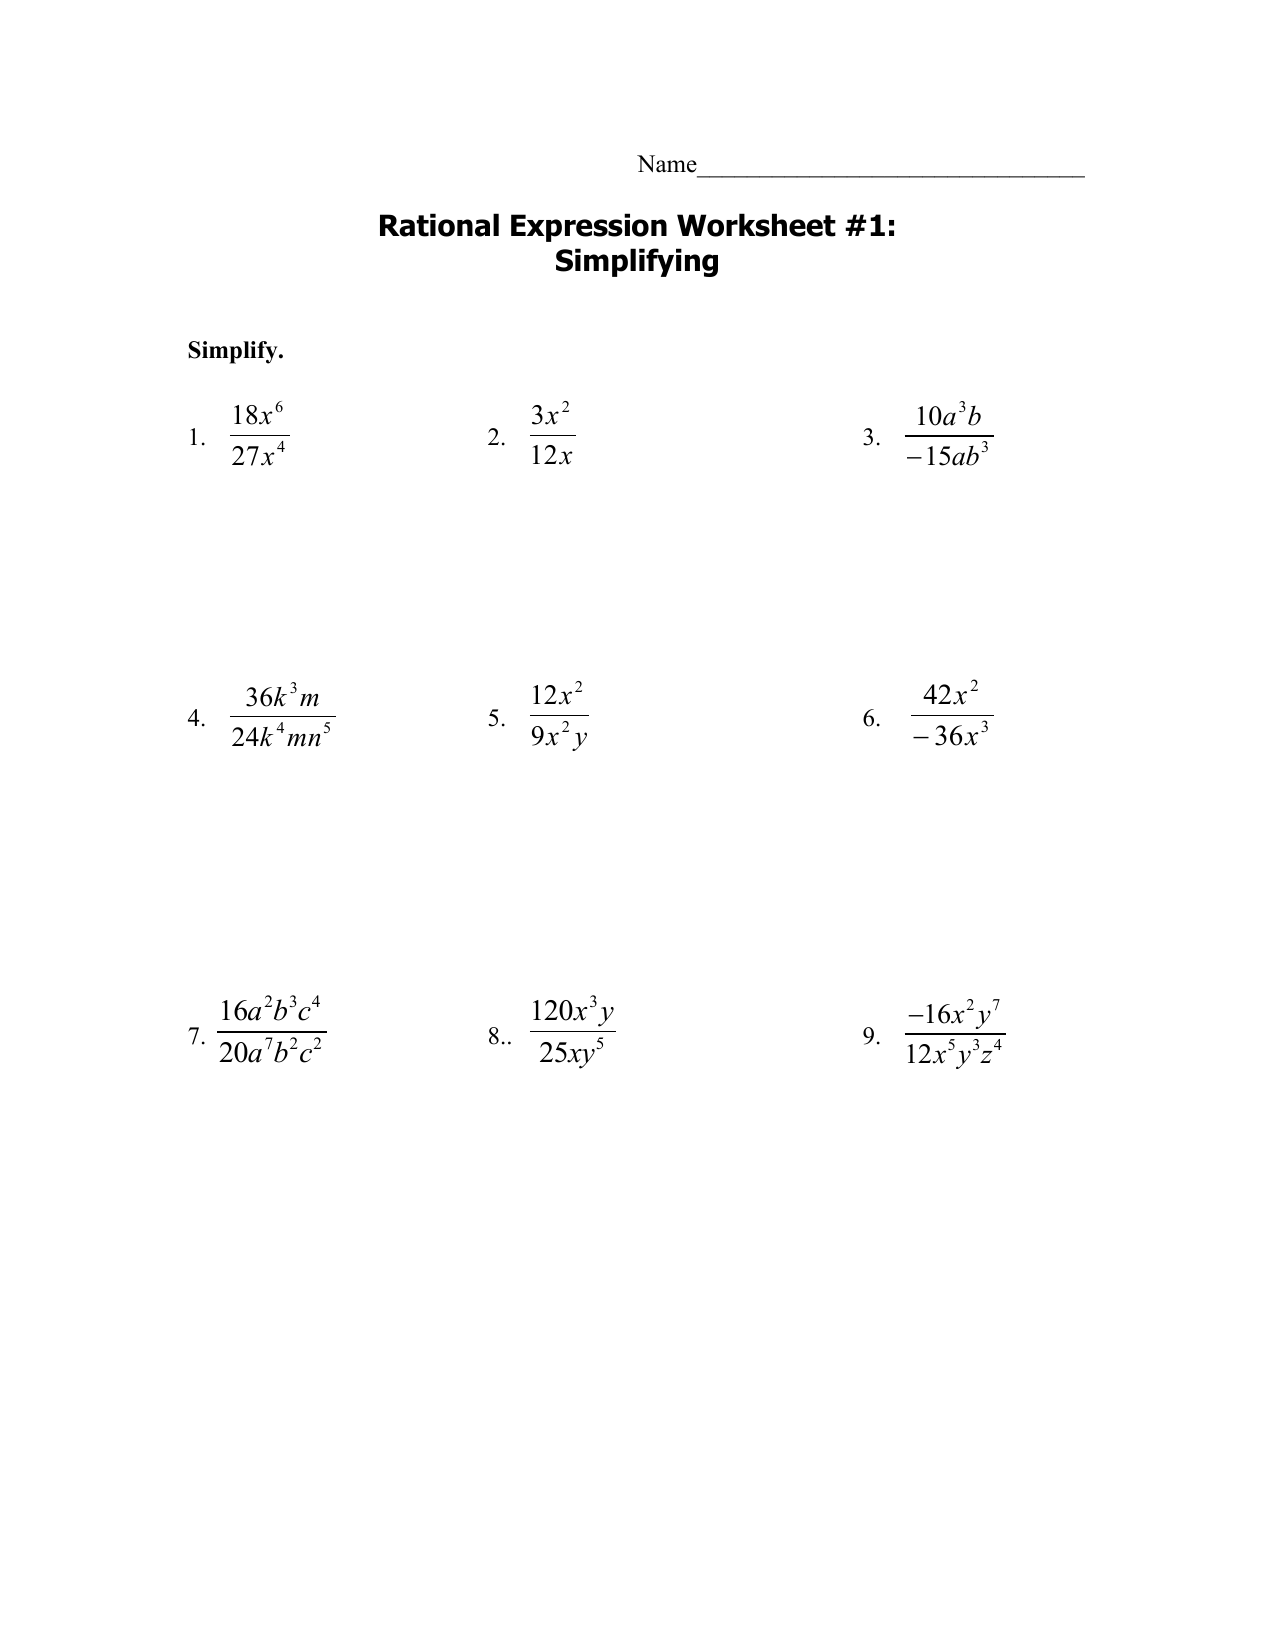 M2221 rationalworksheets221-2221 221 Throughout Simplifying Rational Expressions Worksheet Answers